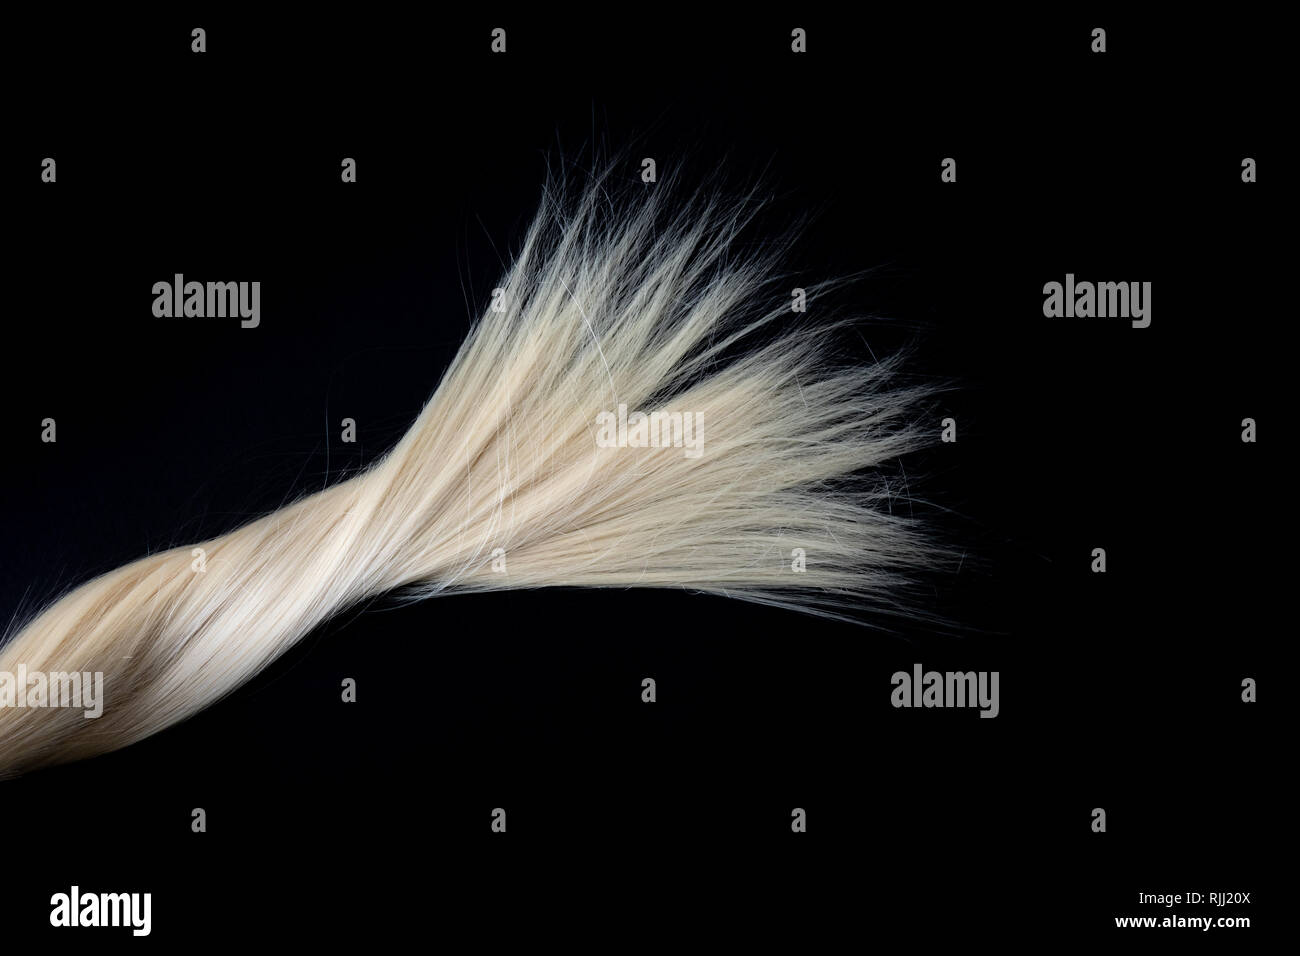 Piece of blond shiny hair texture on black. Abstract fashion style background. Stock Photo